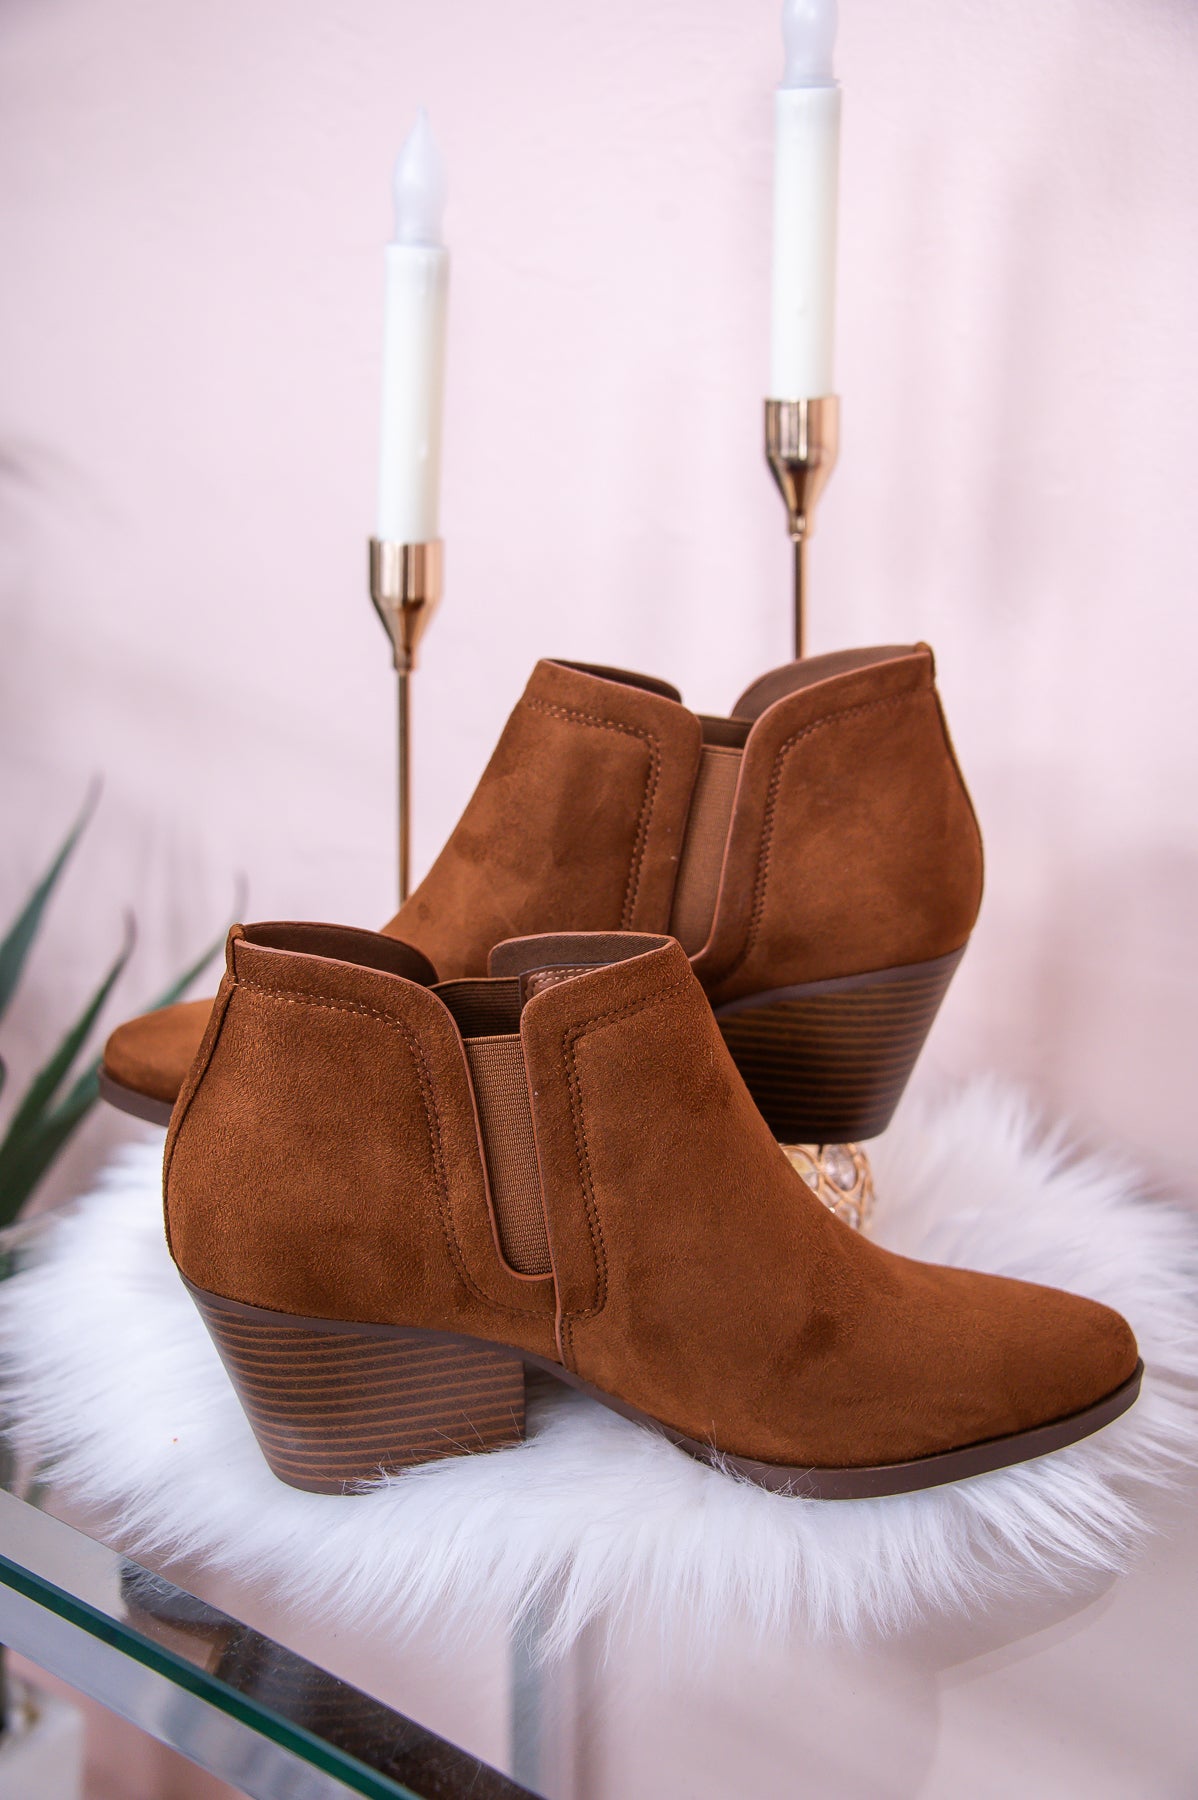 Let's Get Lost Together Cognac Slip On Booties - SHO2622CGN